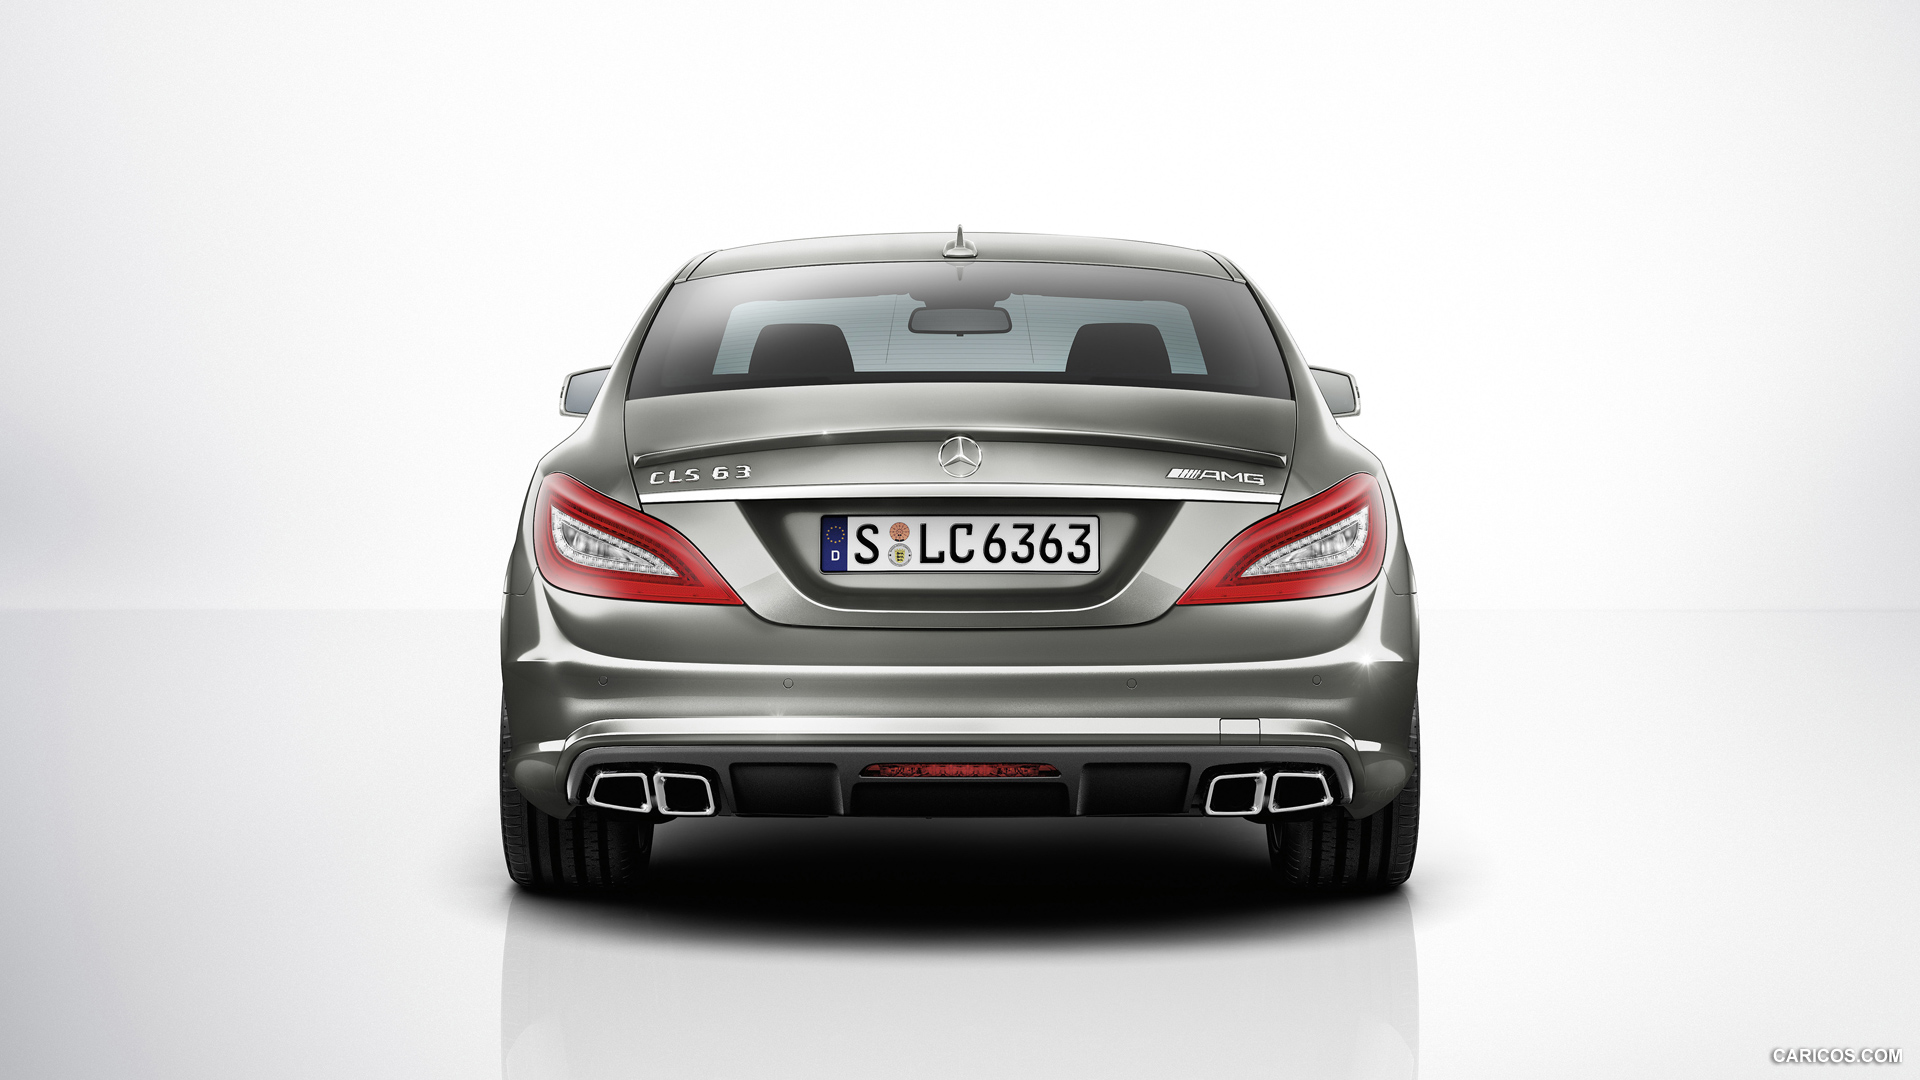 Mercedes-Benz CLS 63 AMG (2012)  - Rear Angle , #78 of 85